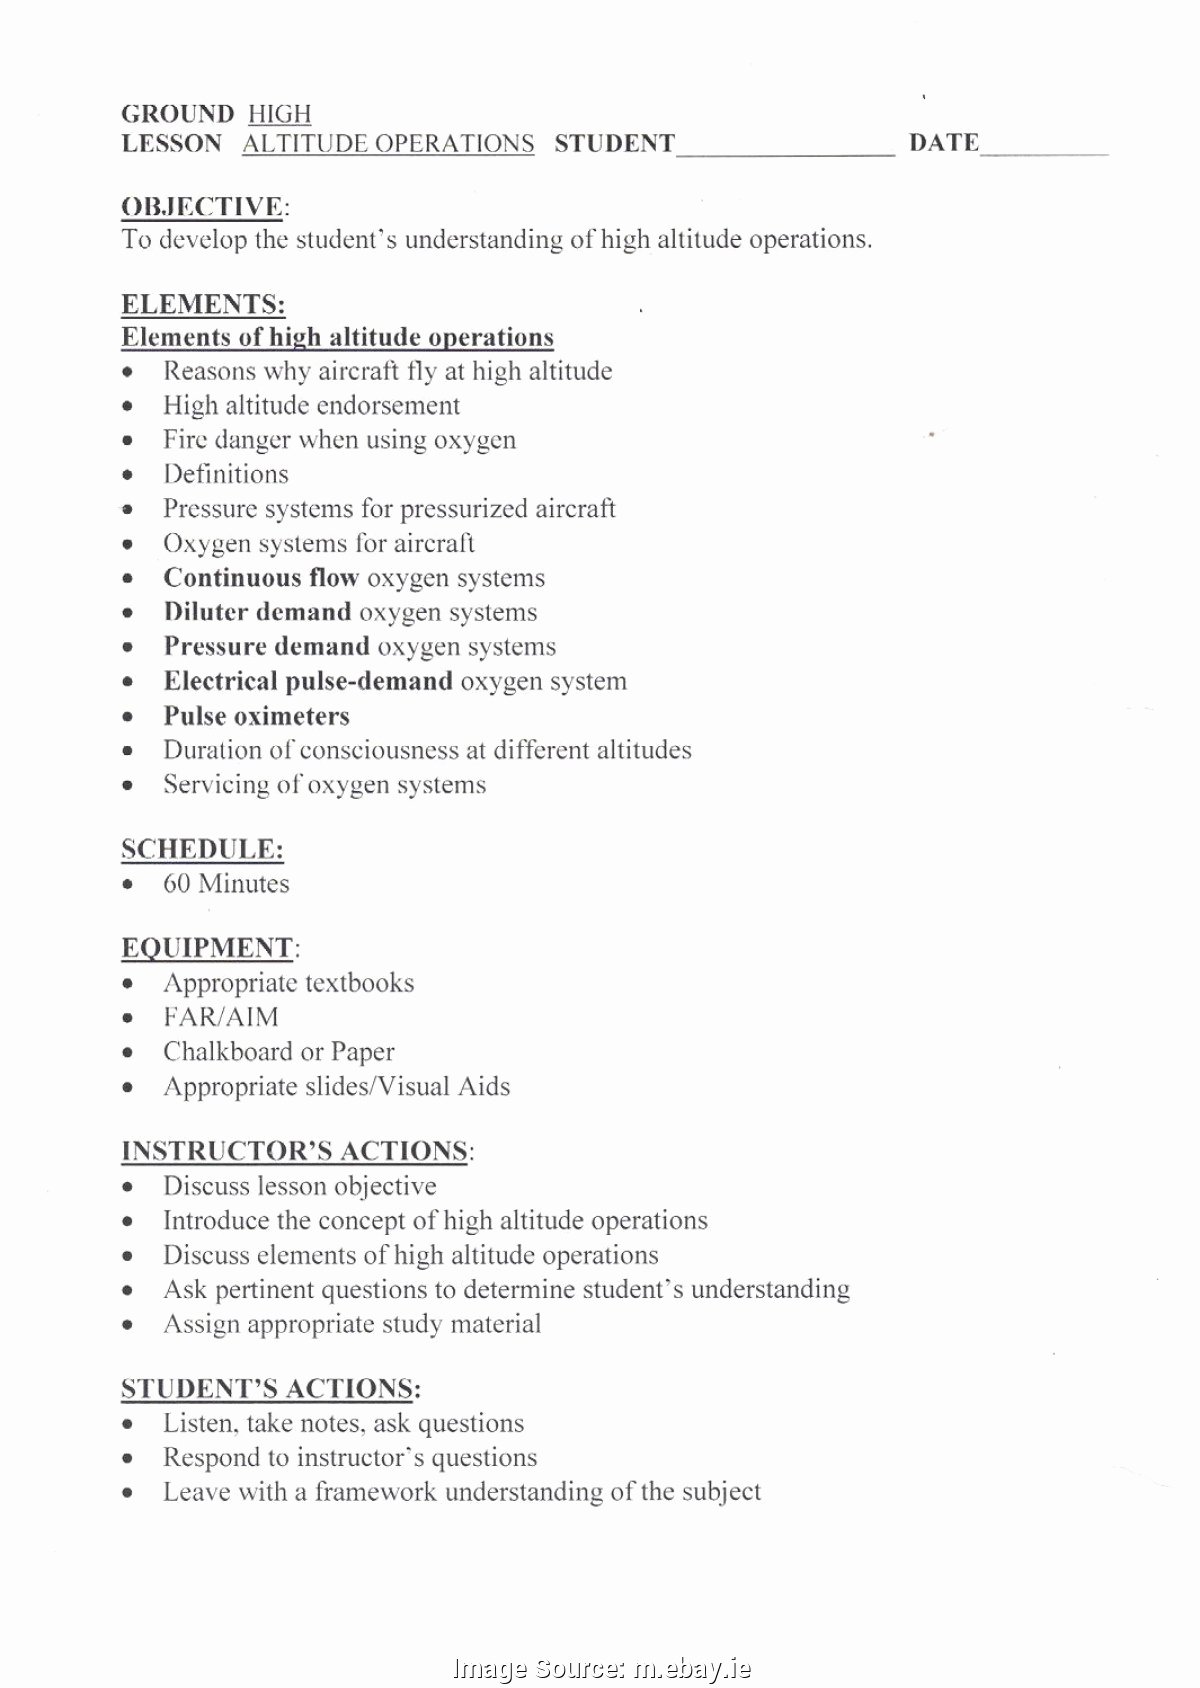 Udl Lesson Plan Template Beautiful Professional Lesson Plan Template – Udl Alternative Lesson